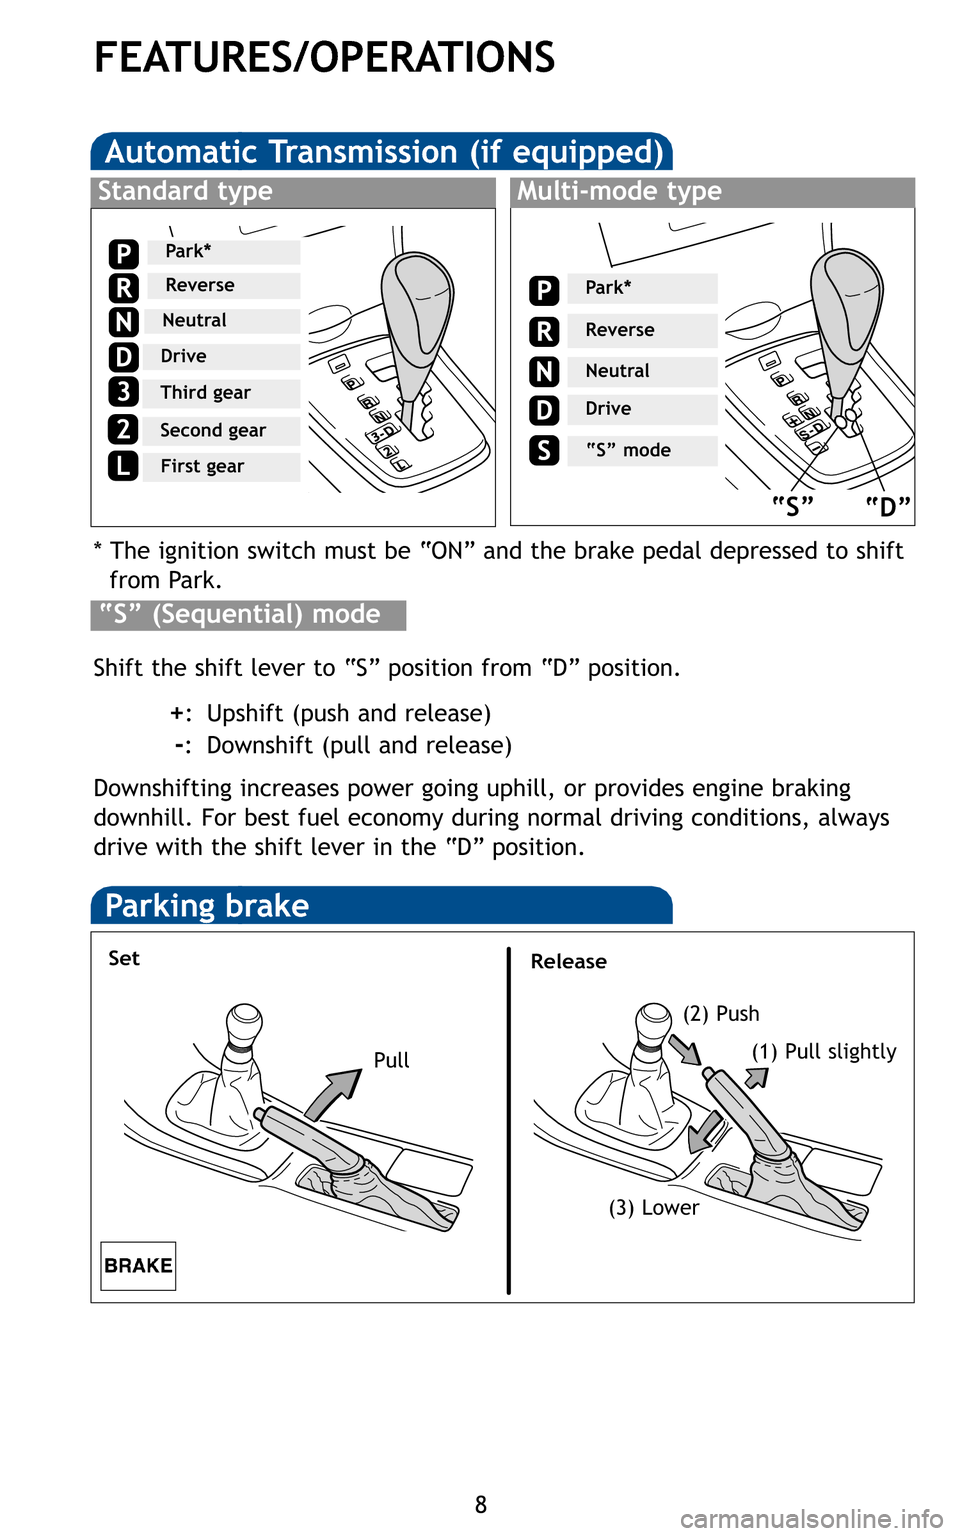 TOYOTA COROLLA 2011 10.G Quick Reference Guide 8
FEATURES/OPERATIONS

* The ignition switch must be “ON” and the brake pedal depressed to shift from Park. 
Shift the shift lever to “S” position from “D” position.
+: Upshift (push and r